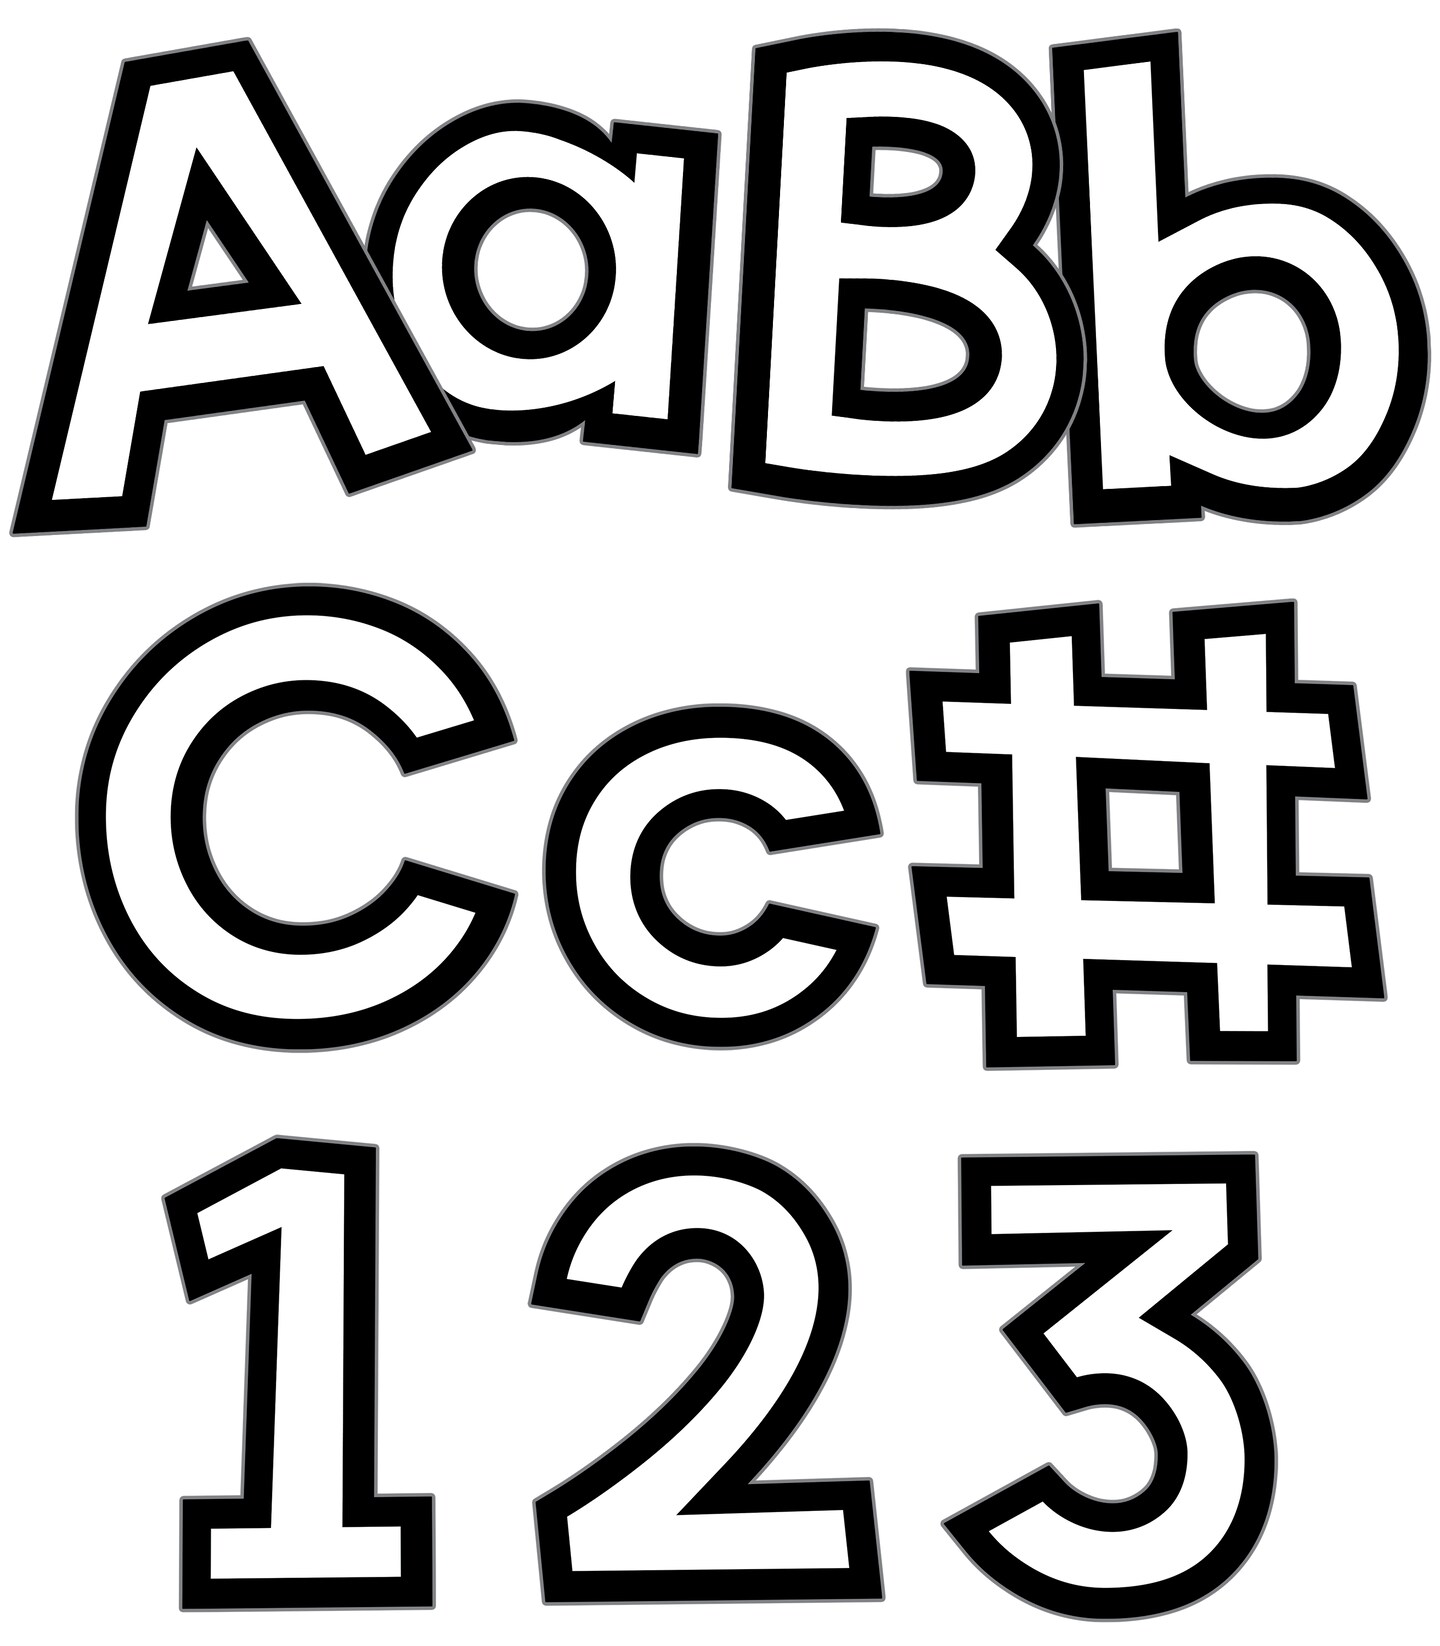 Carson Dellosa 219-Piece 4 Inch Black and White Cutout Letters for Bulletin Boards, Numbers, Punctuation, Symbols and More, White Classroom Letters for Bulletin Board